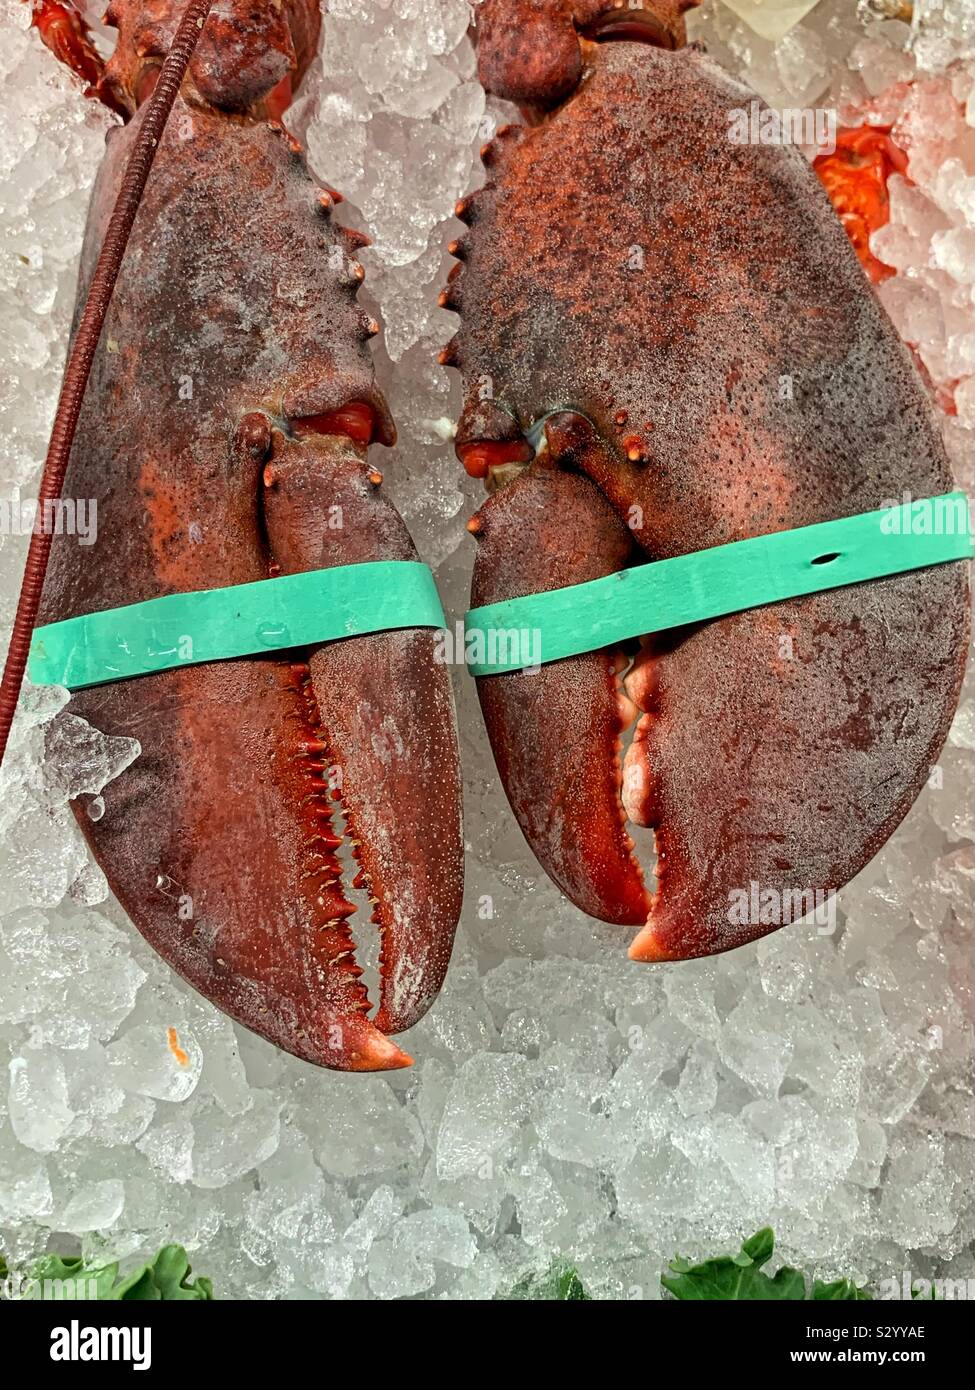 Pair of fresh lobster claws hand cuffed in rubber bands Stock Photo